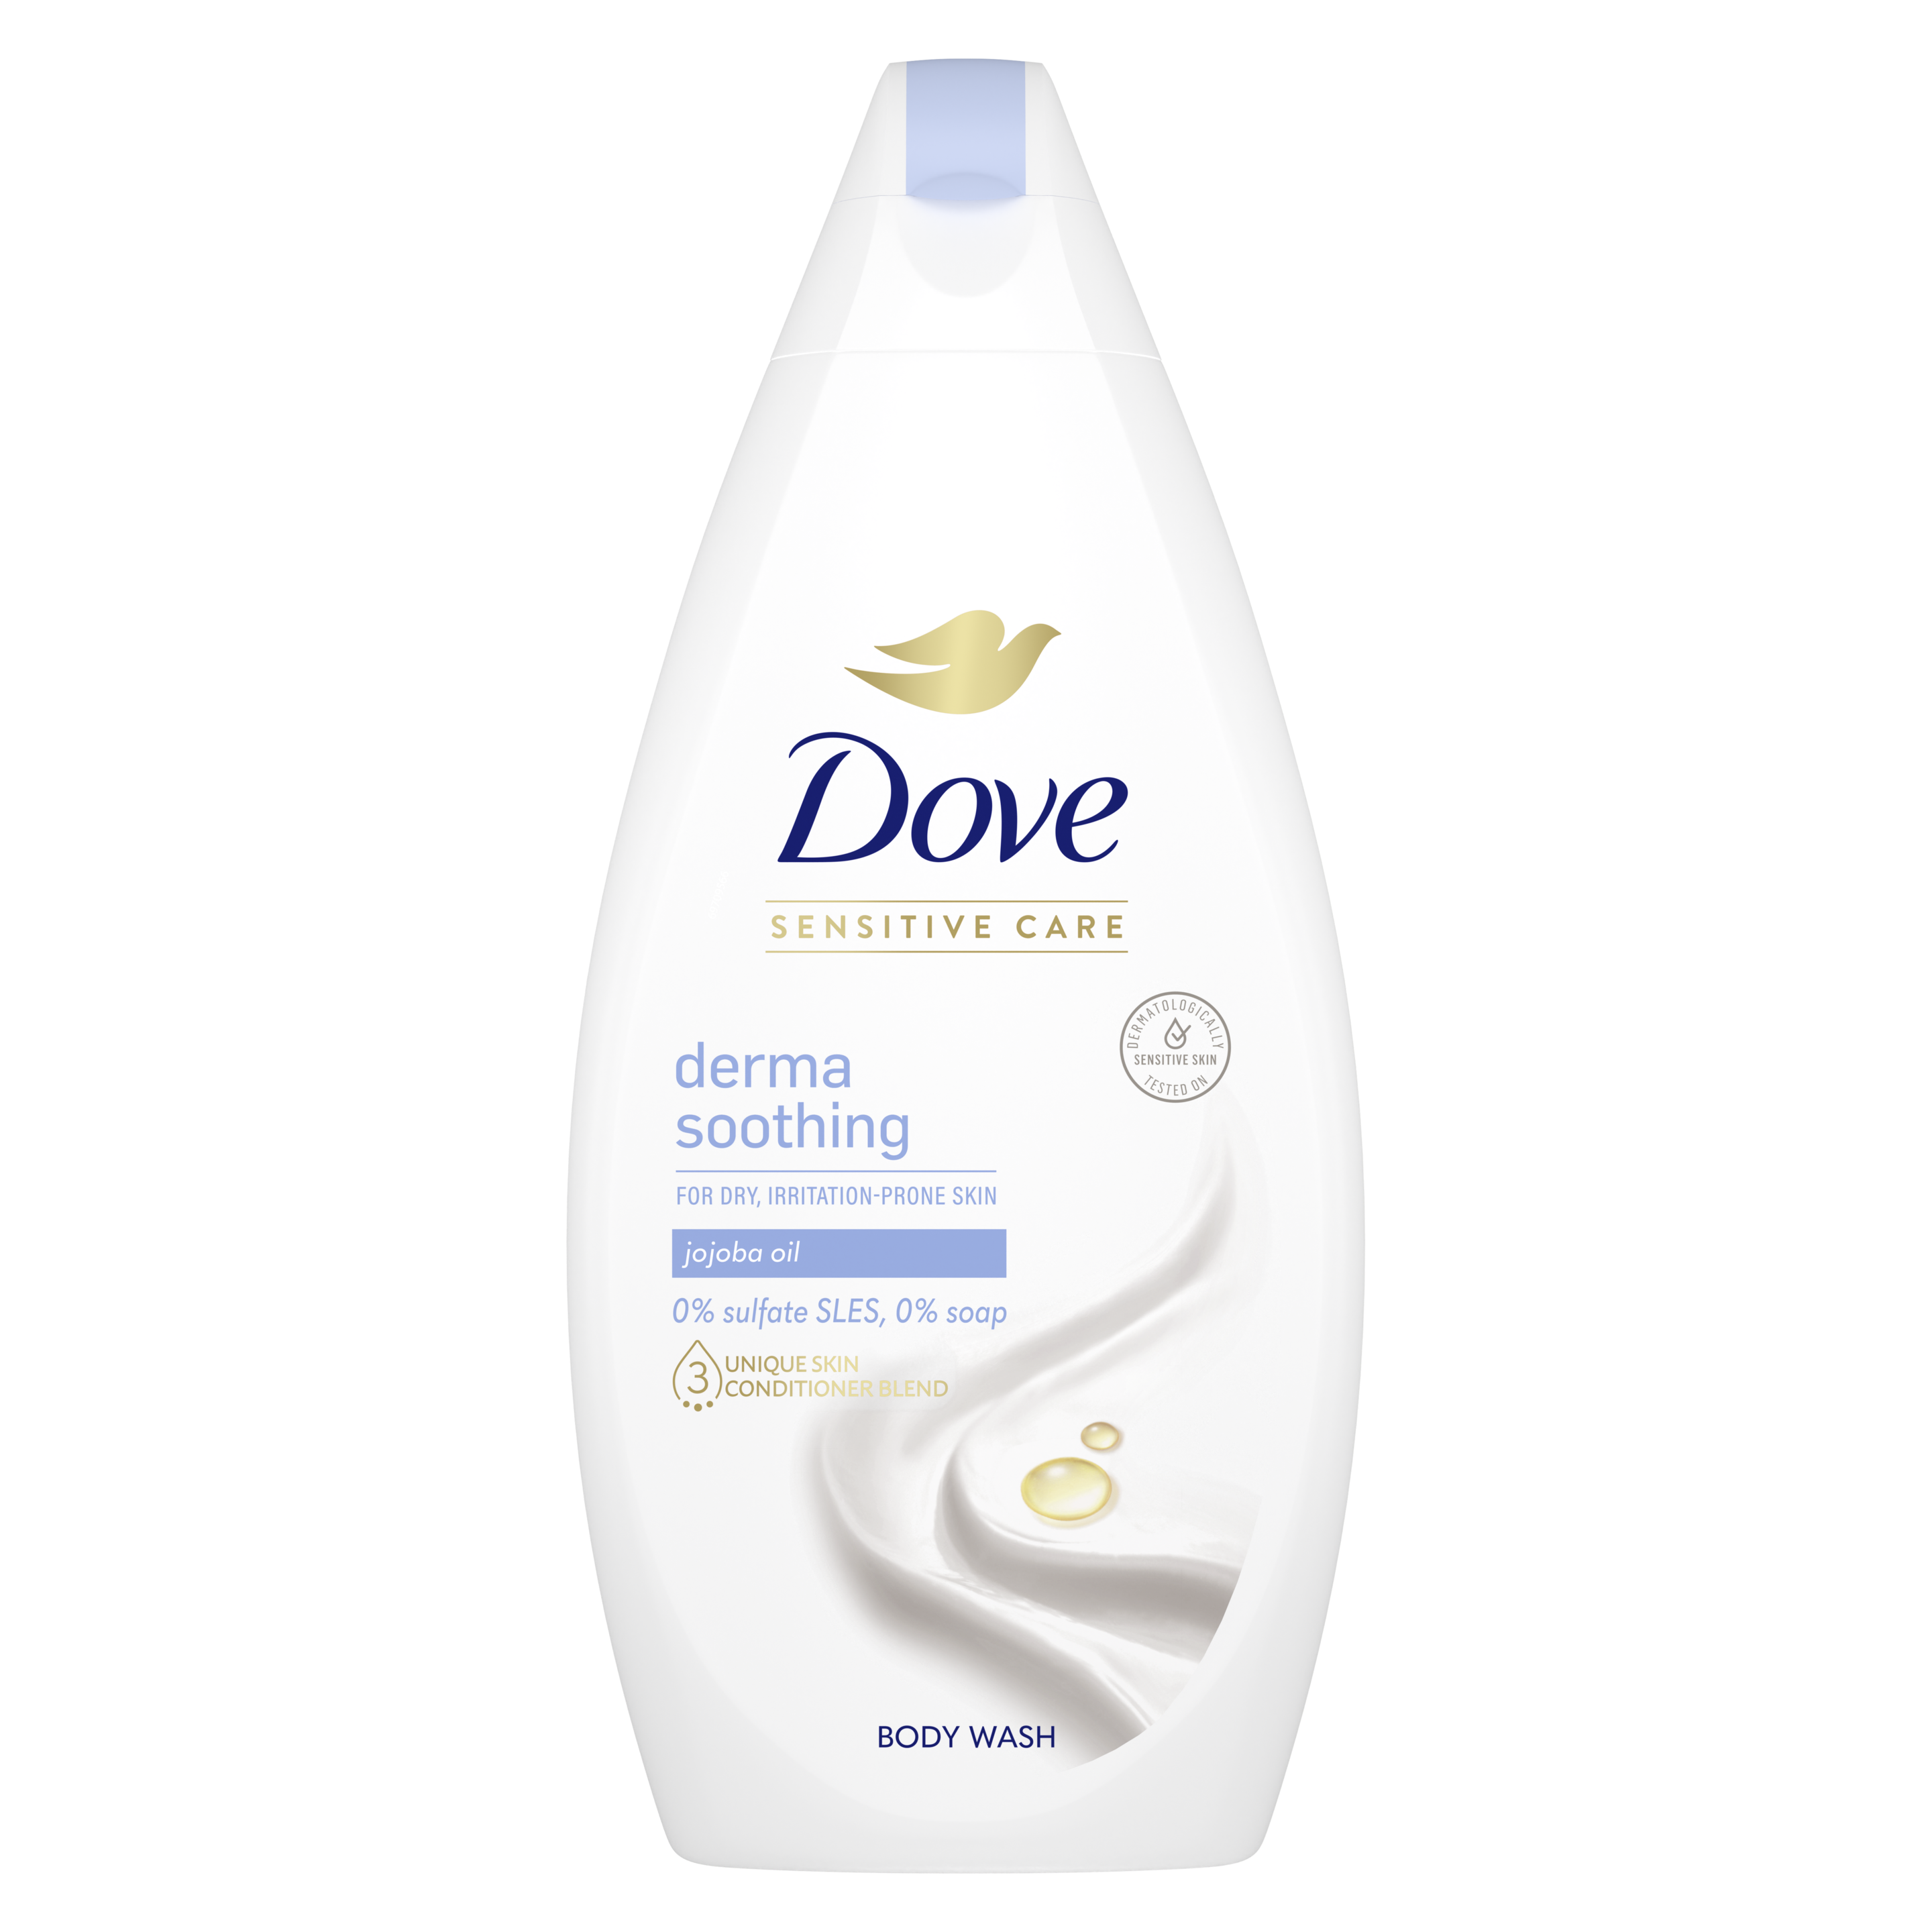 Dove Soothing Care Body Wash 450ml